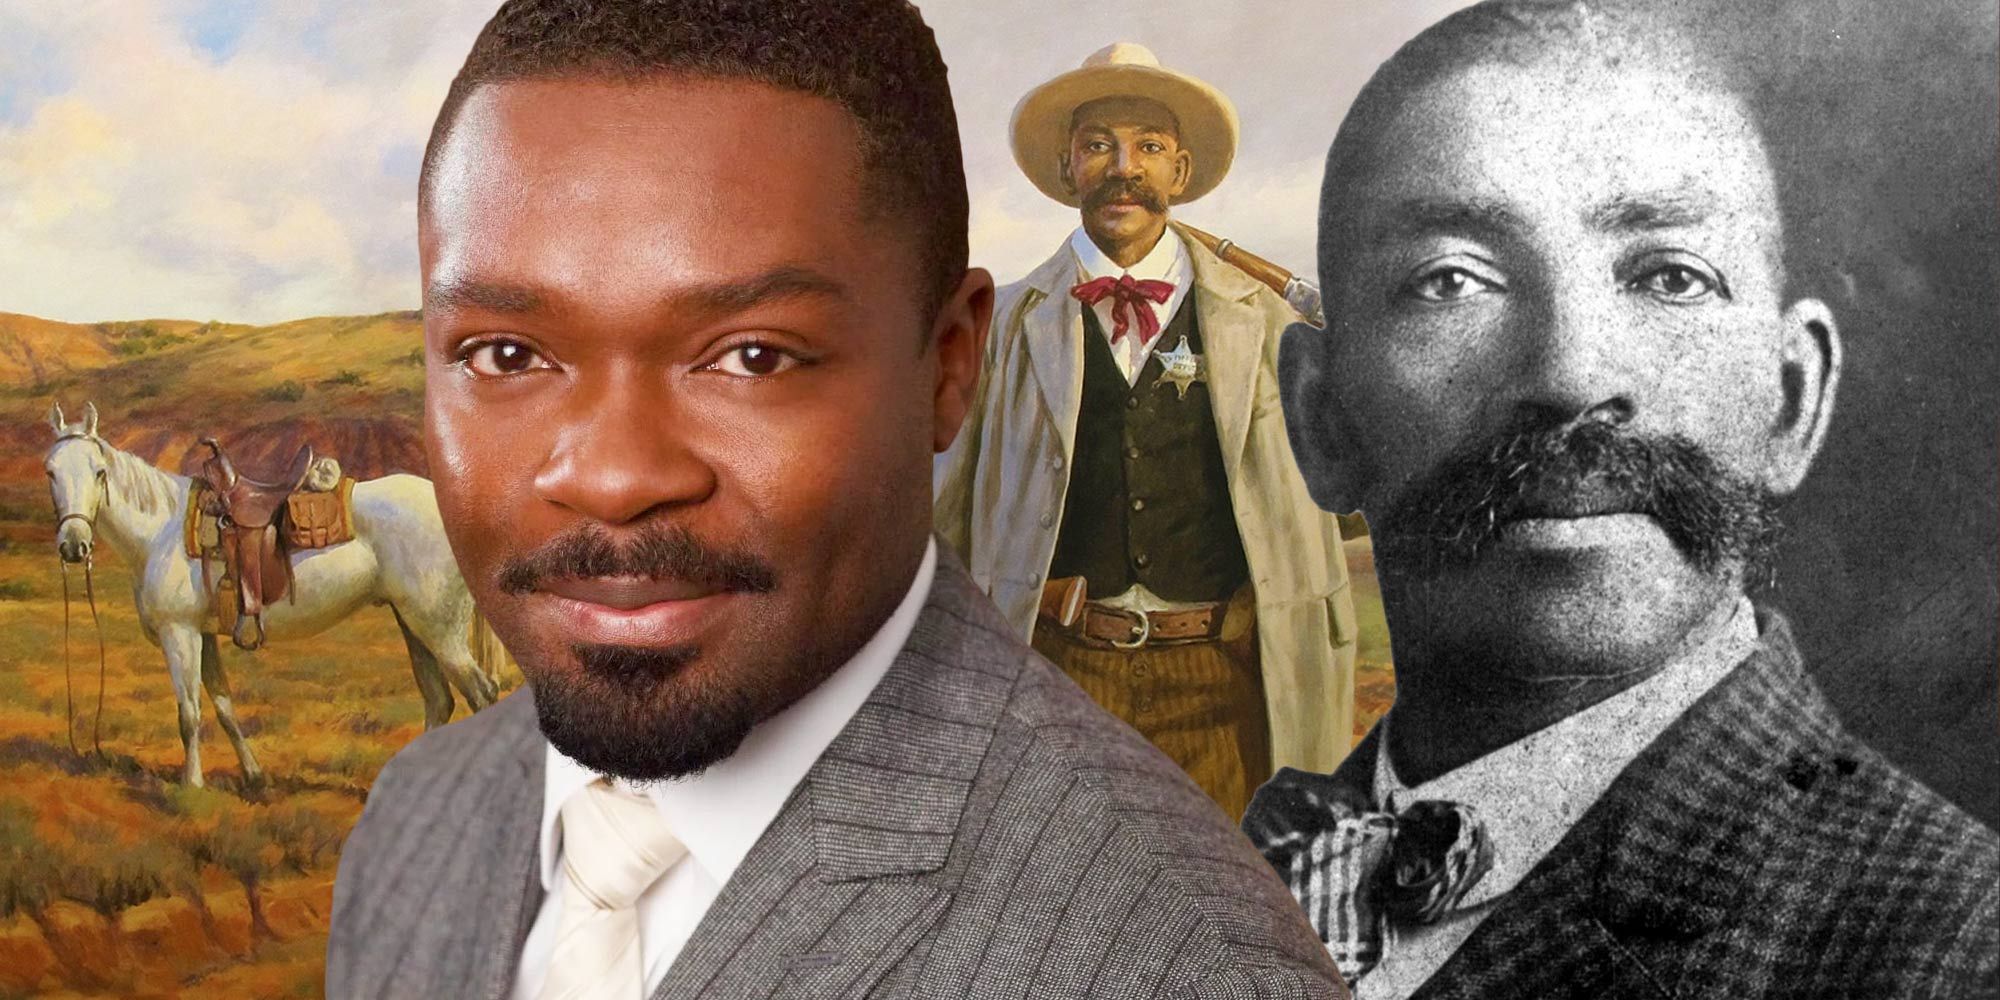 Bass Reeves explained for 1883 season 2